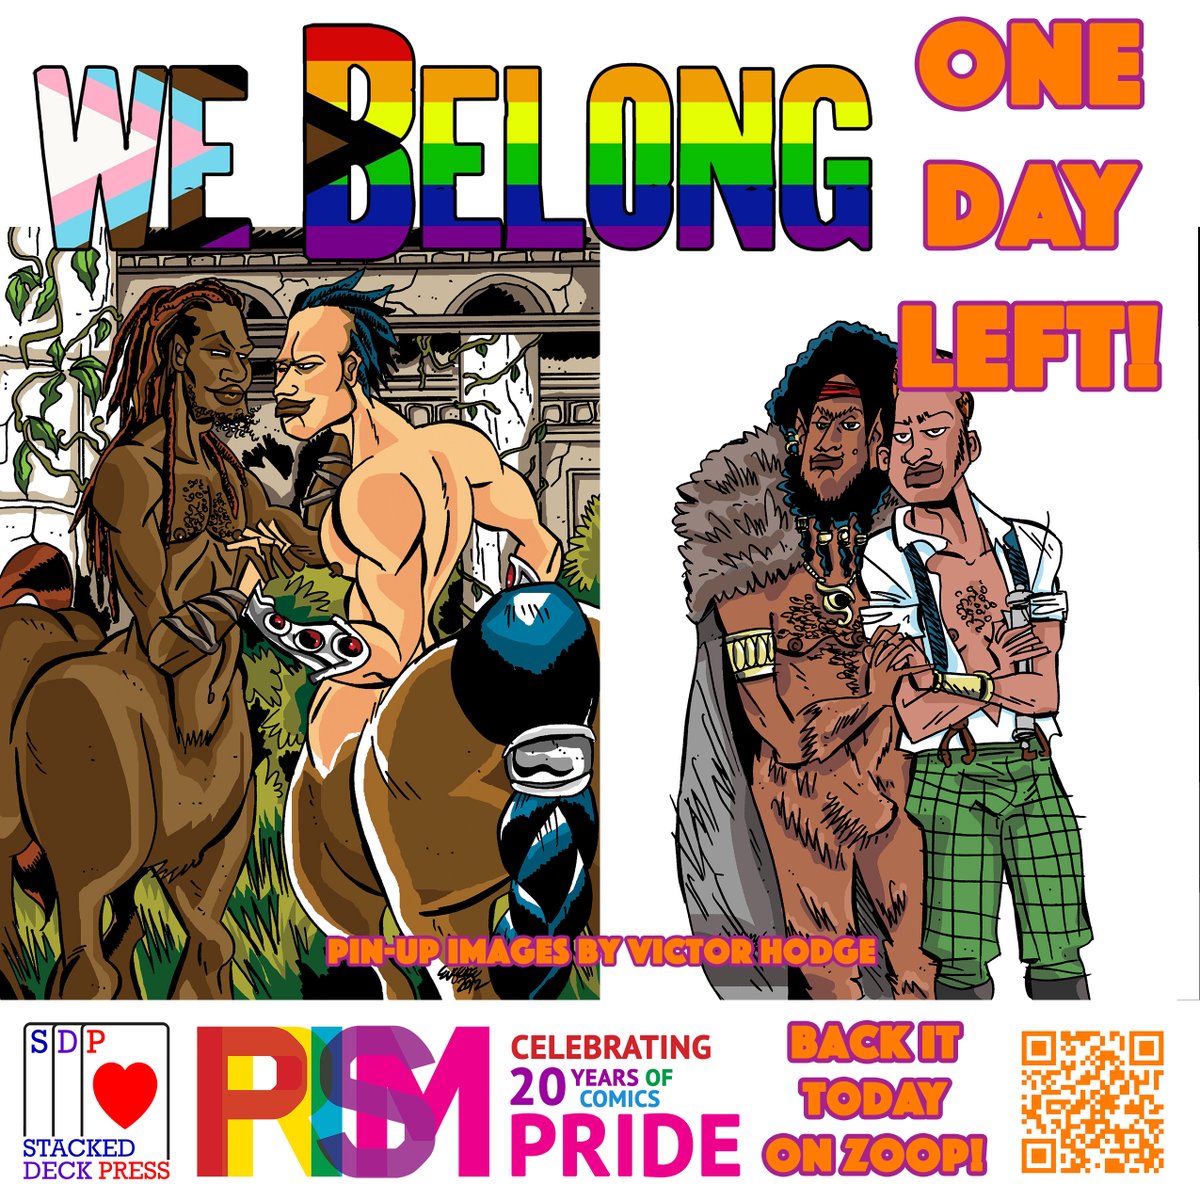 ONE MORE DAY! We Belong is an all-#Black, all-#LGBTQ+ sci-fi and fantasy comics anthology! It features the work of over 20 comics creators including Victor Hodge! We still need your help to make our goal! Back it on @WeAreZoop today! zoop.gg/c/webelong